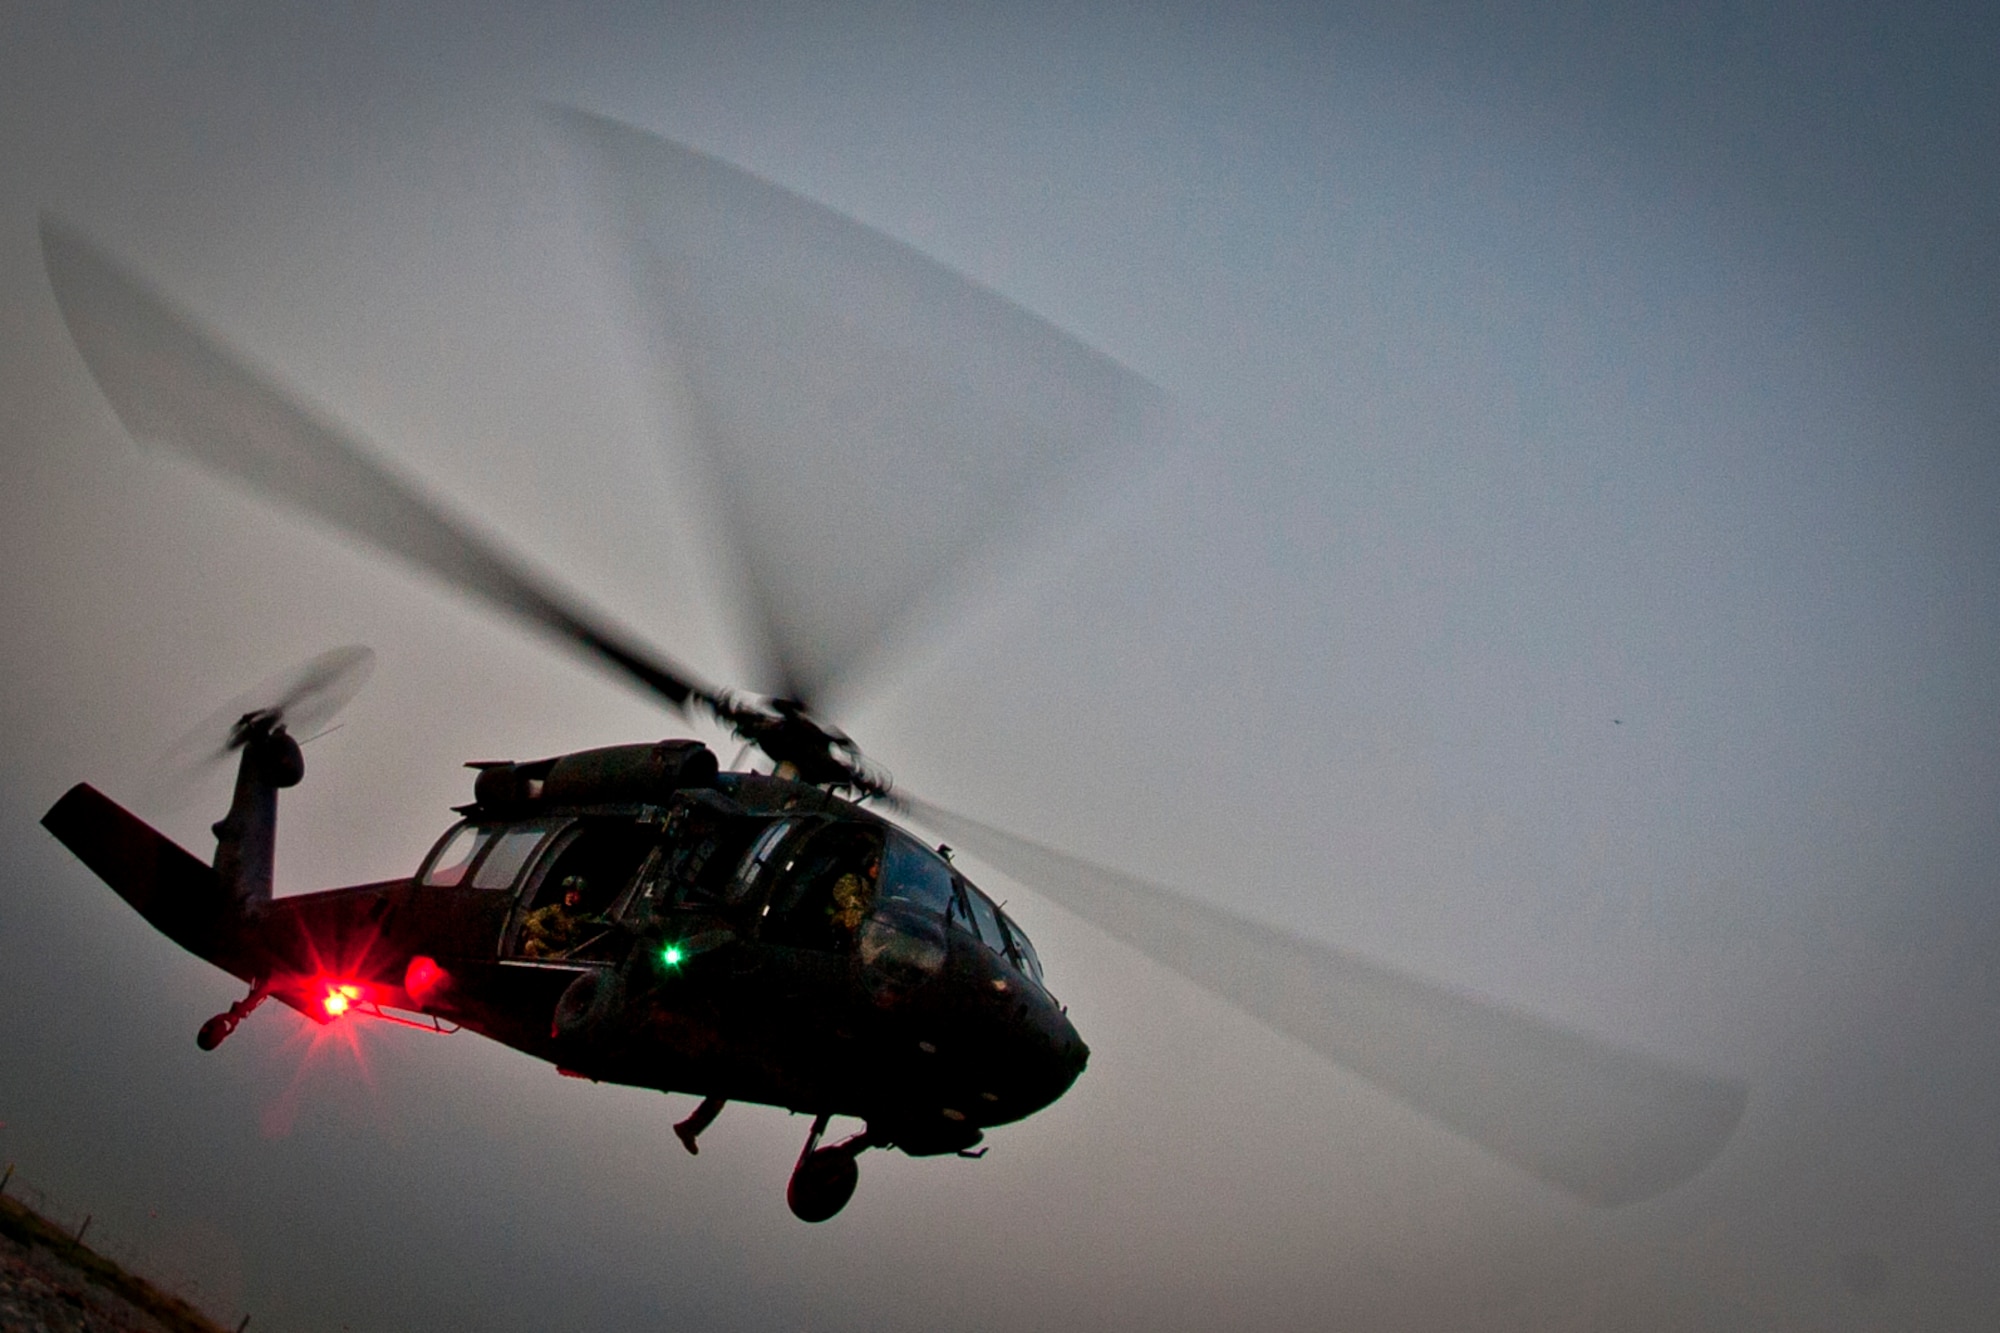 A UH-60 Black Hawk helicopter approaches the landing zone during a joint-coalition sling load training mission at Kandahar Airfield, Afghanistan, June 1, 2013. The training provided coalition members the opportunity to learn the concepts of marking and illuminating a landing zone as well as in-flight cargo sling loading. (U.S. Air Force photo/Senior Airman Scott Saldukas)